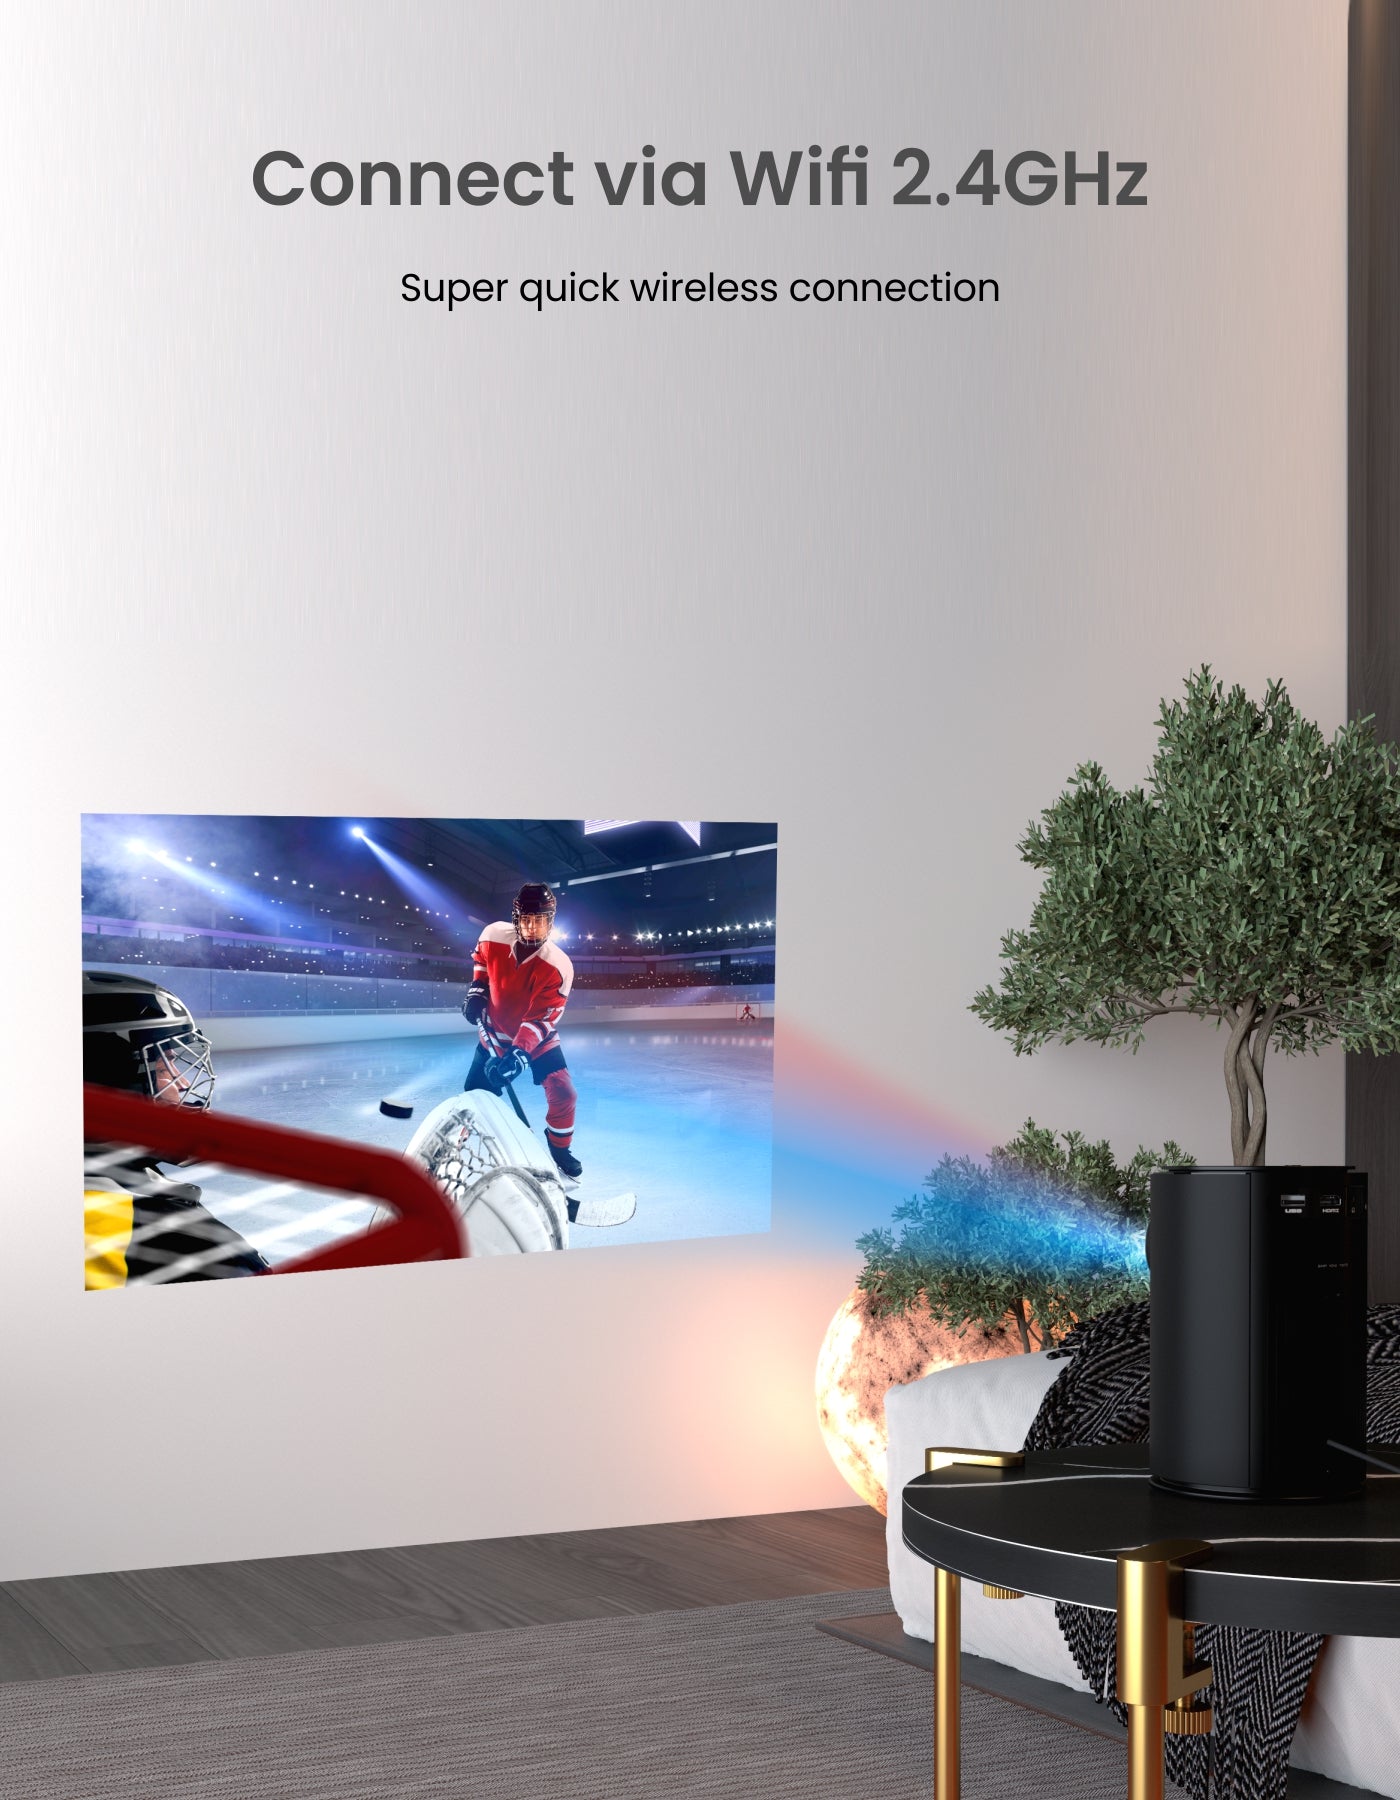 Portronics Beem 400 smart wireless projector has multiple connectivity options to enjoy your cinema any tiime| portable projector with multiple connection options